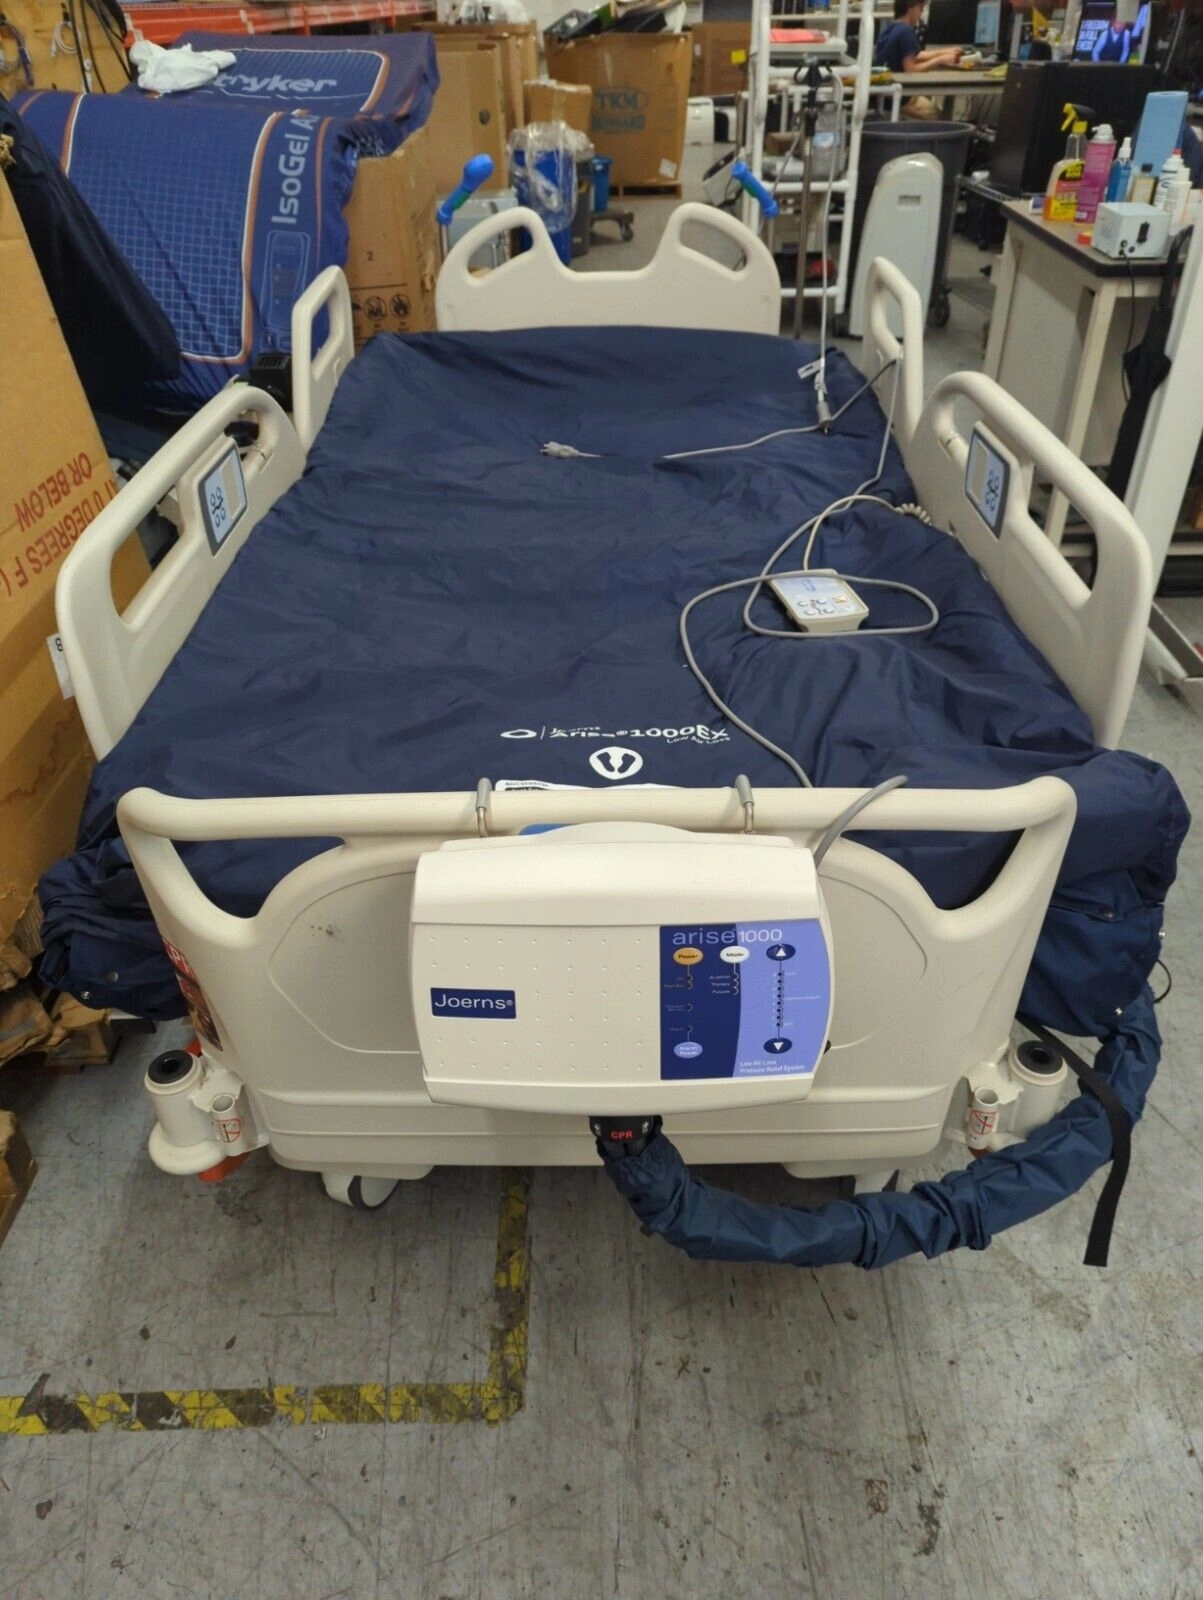 HILL-ROM P7800 HOSPITAL ELECTRIC BED